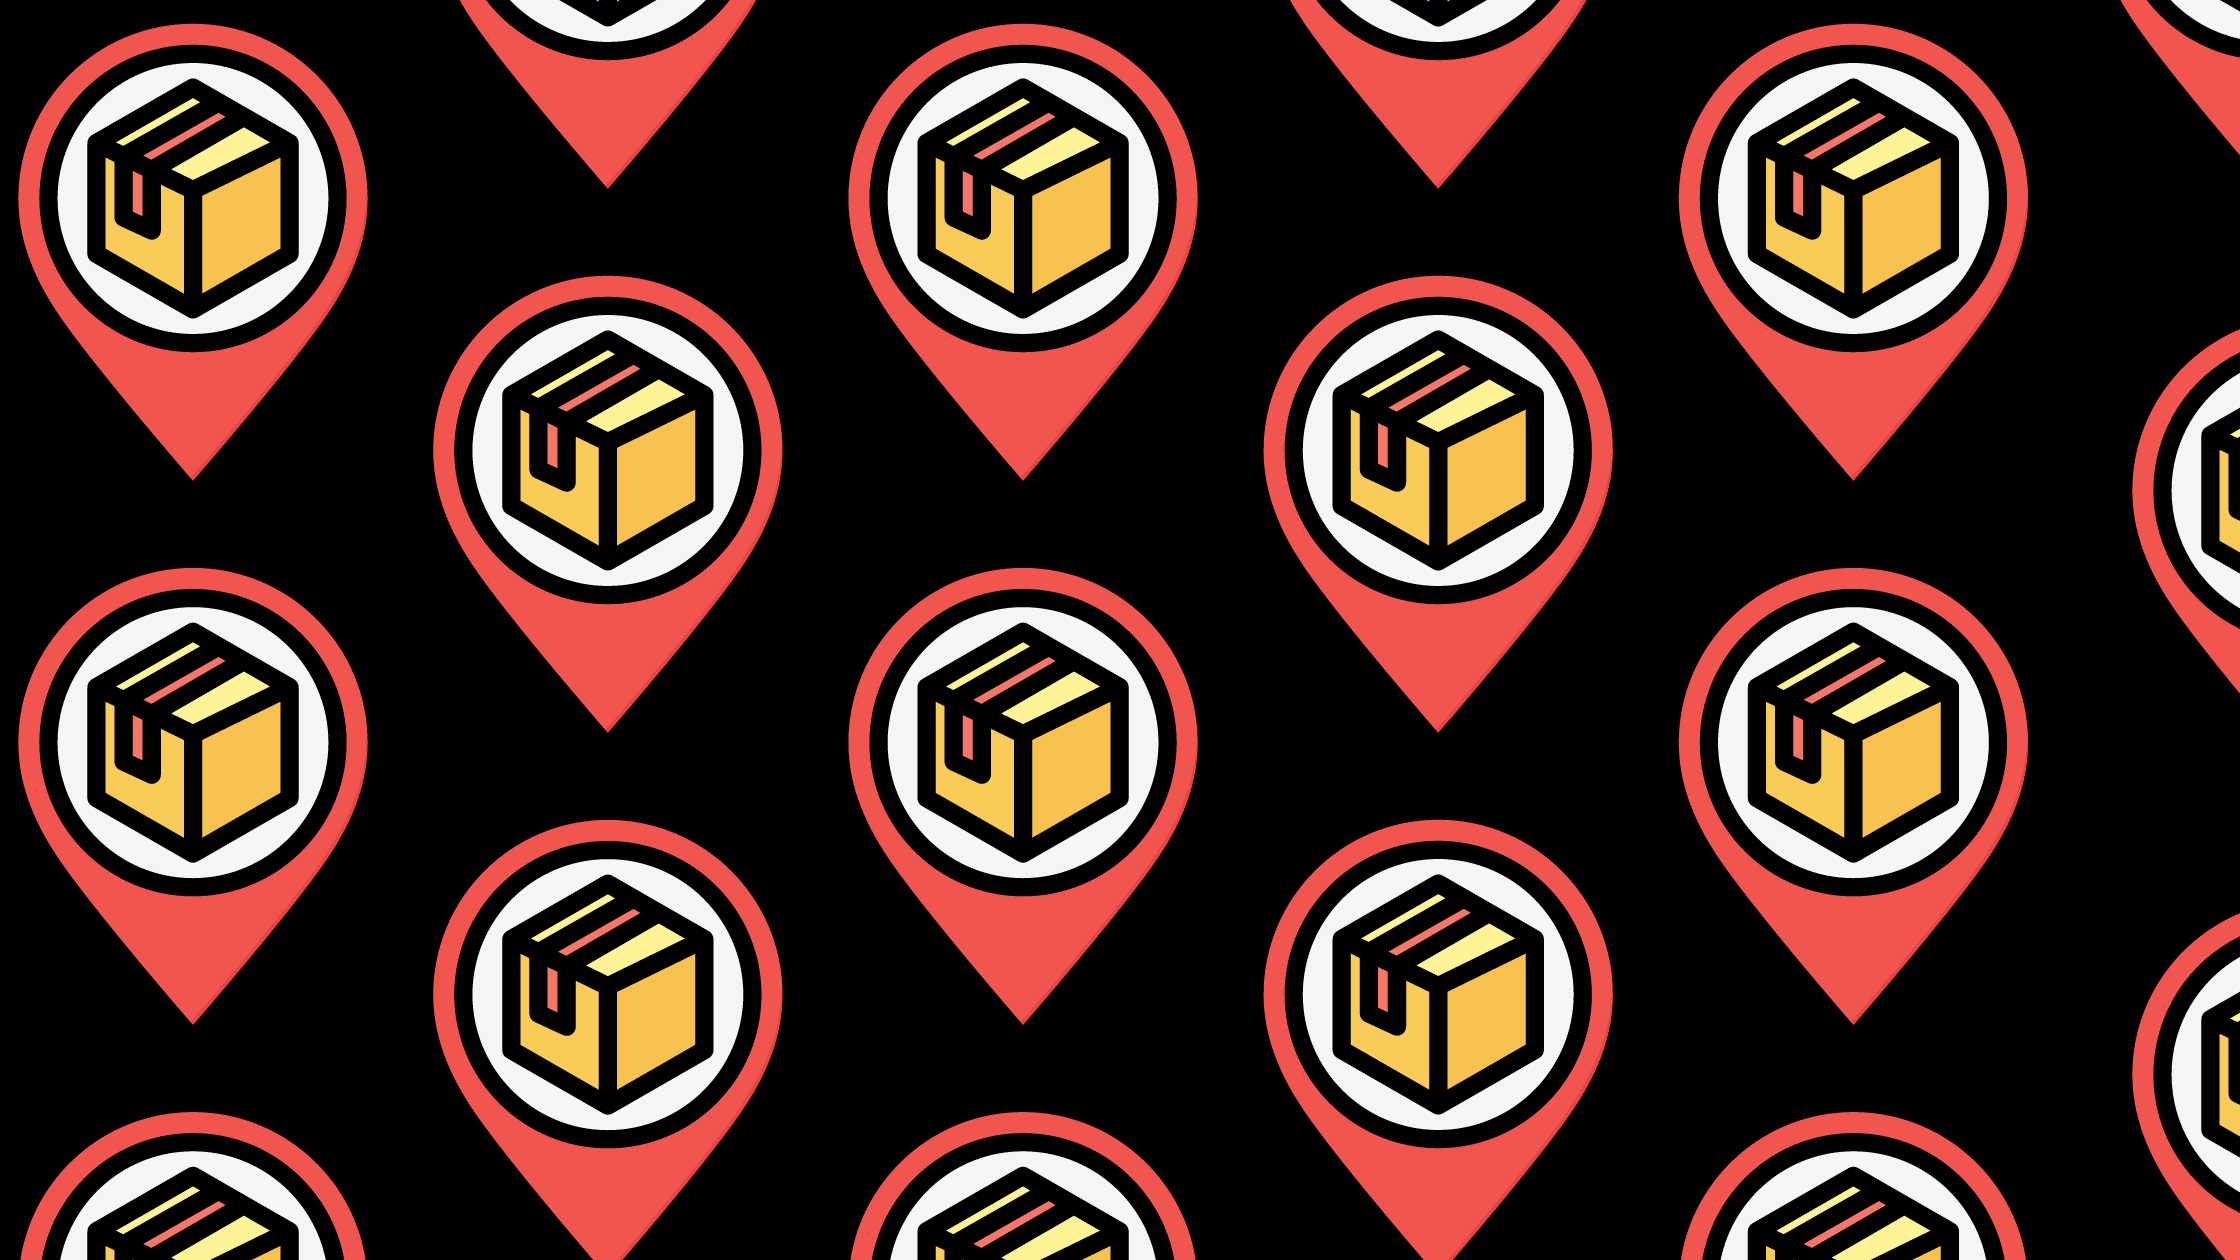 A repeating pattern of location pins with shipping box icons inside of them